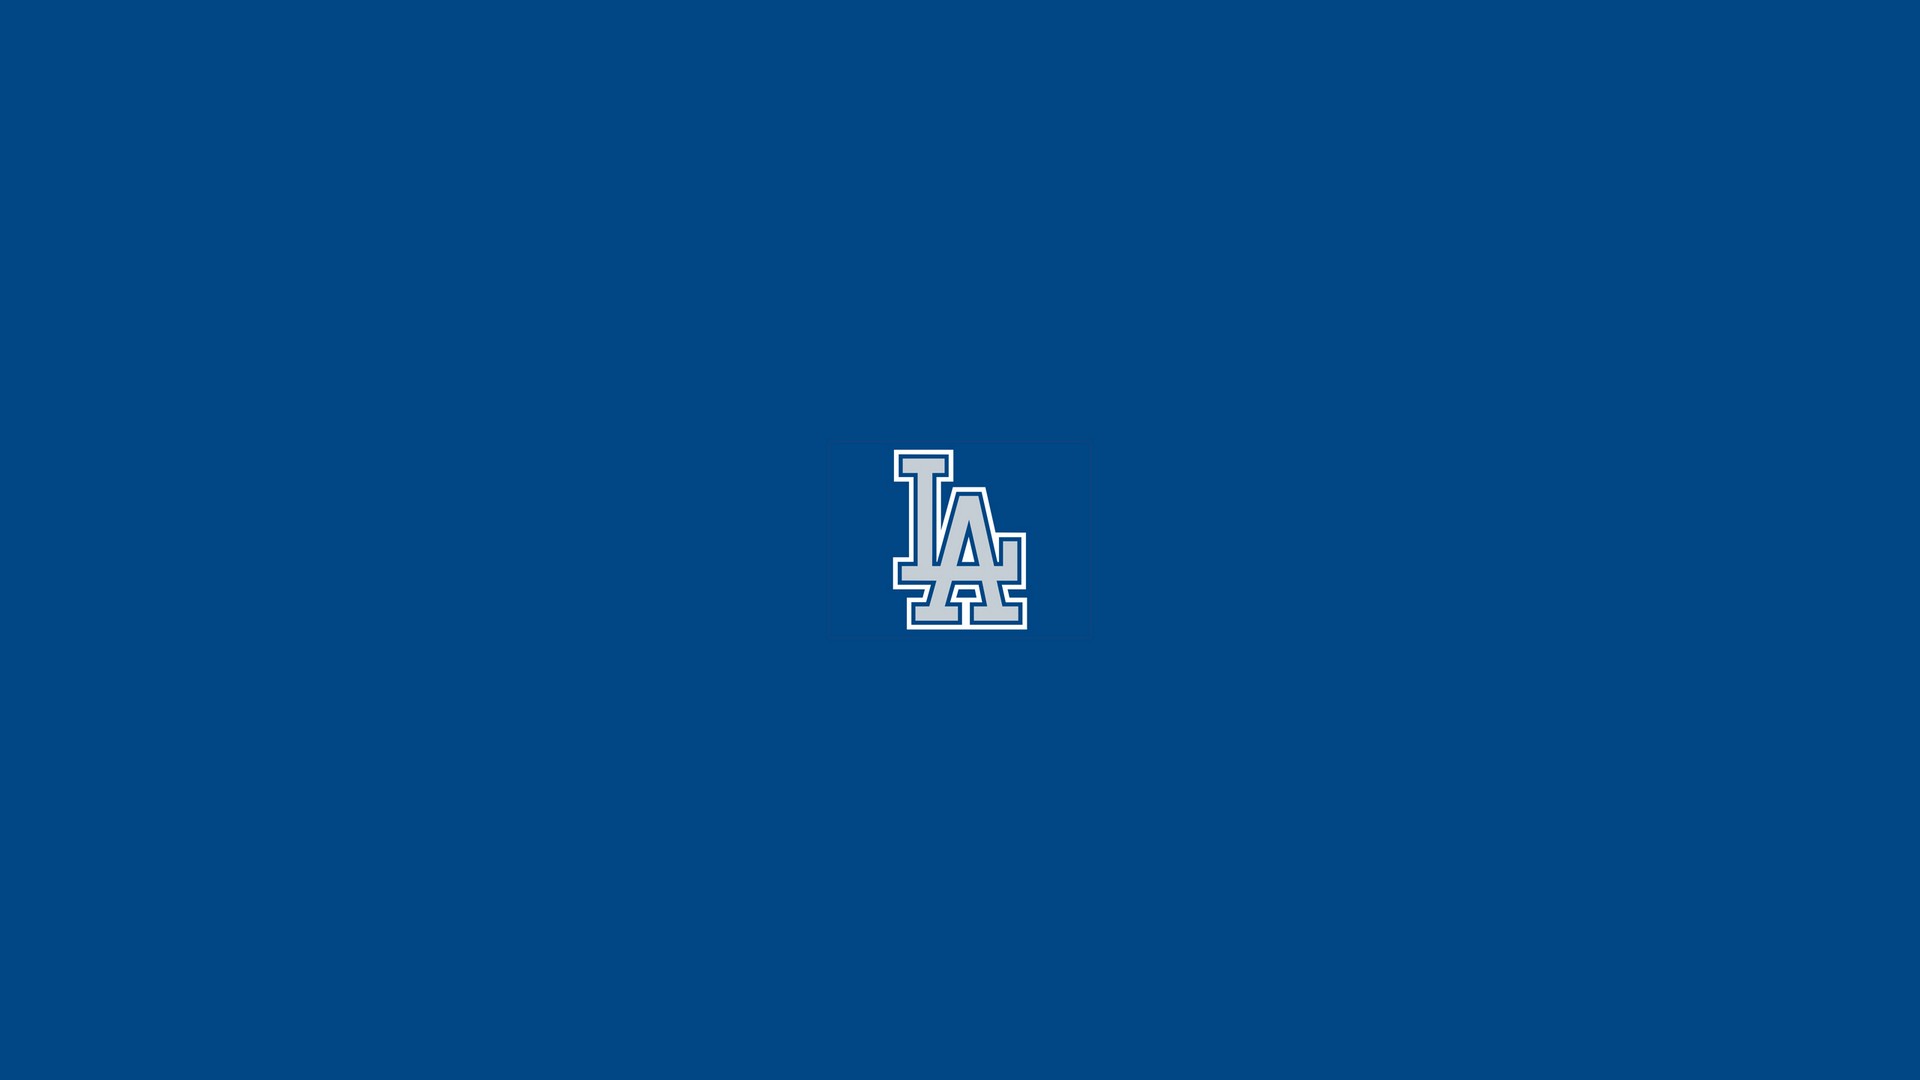 Los Angeles Dodgers MLB Wallpaper For Mac Backgrounds With high-resolution 1920X1080 pixel. You can use this wallpaper for Mac Desktop Wallpaper, Laptop Screensavers, Android Wallpapers, Tablet or iPhone Home Screen and another mobile phone device